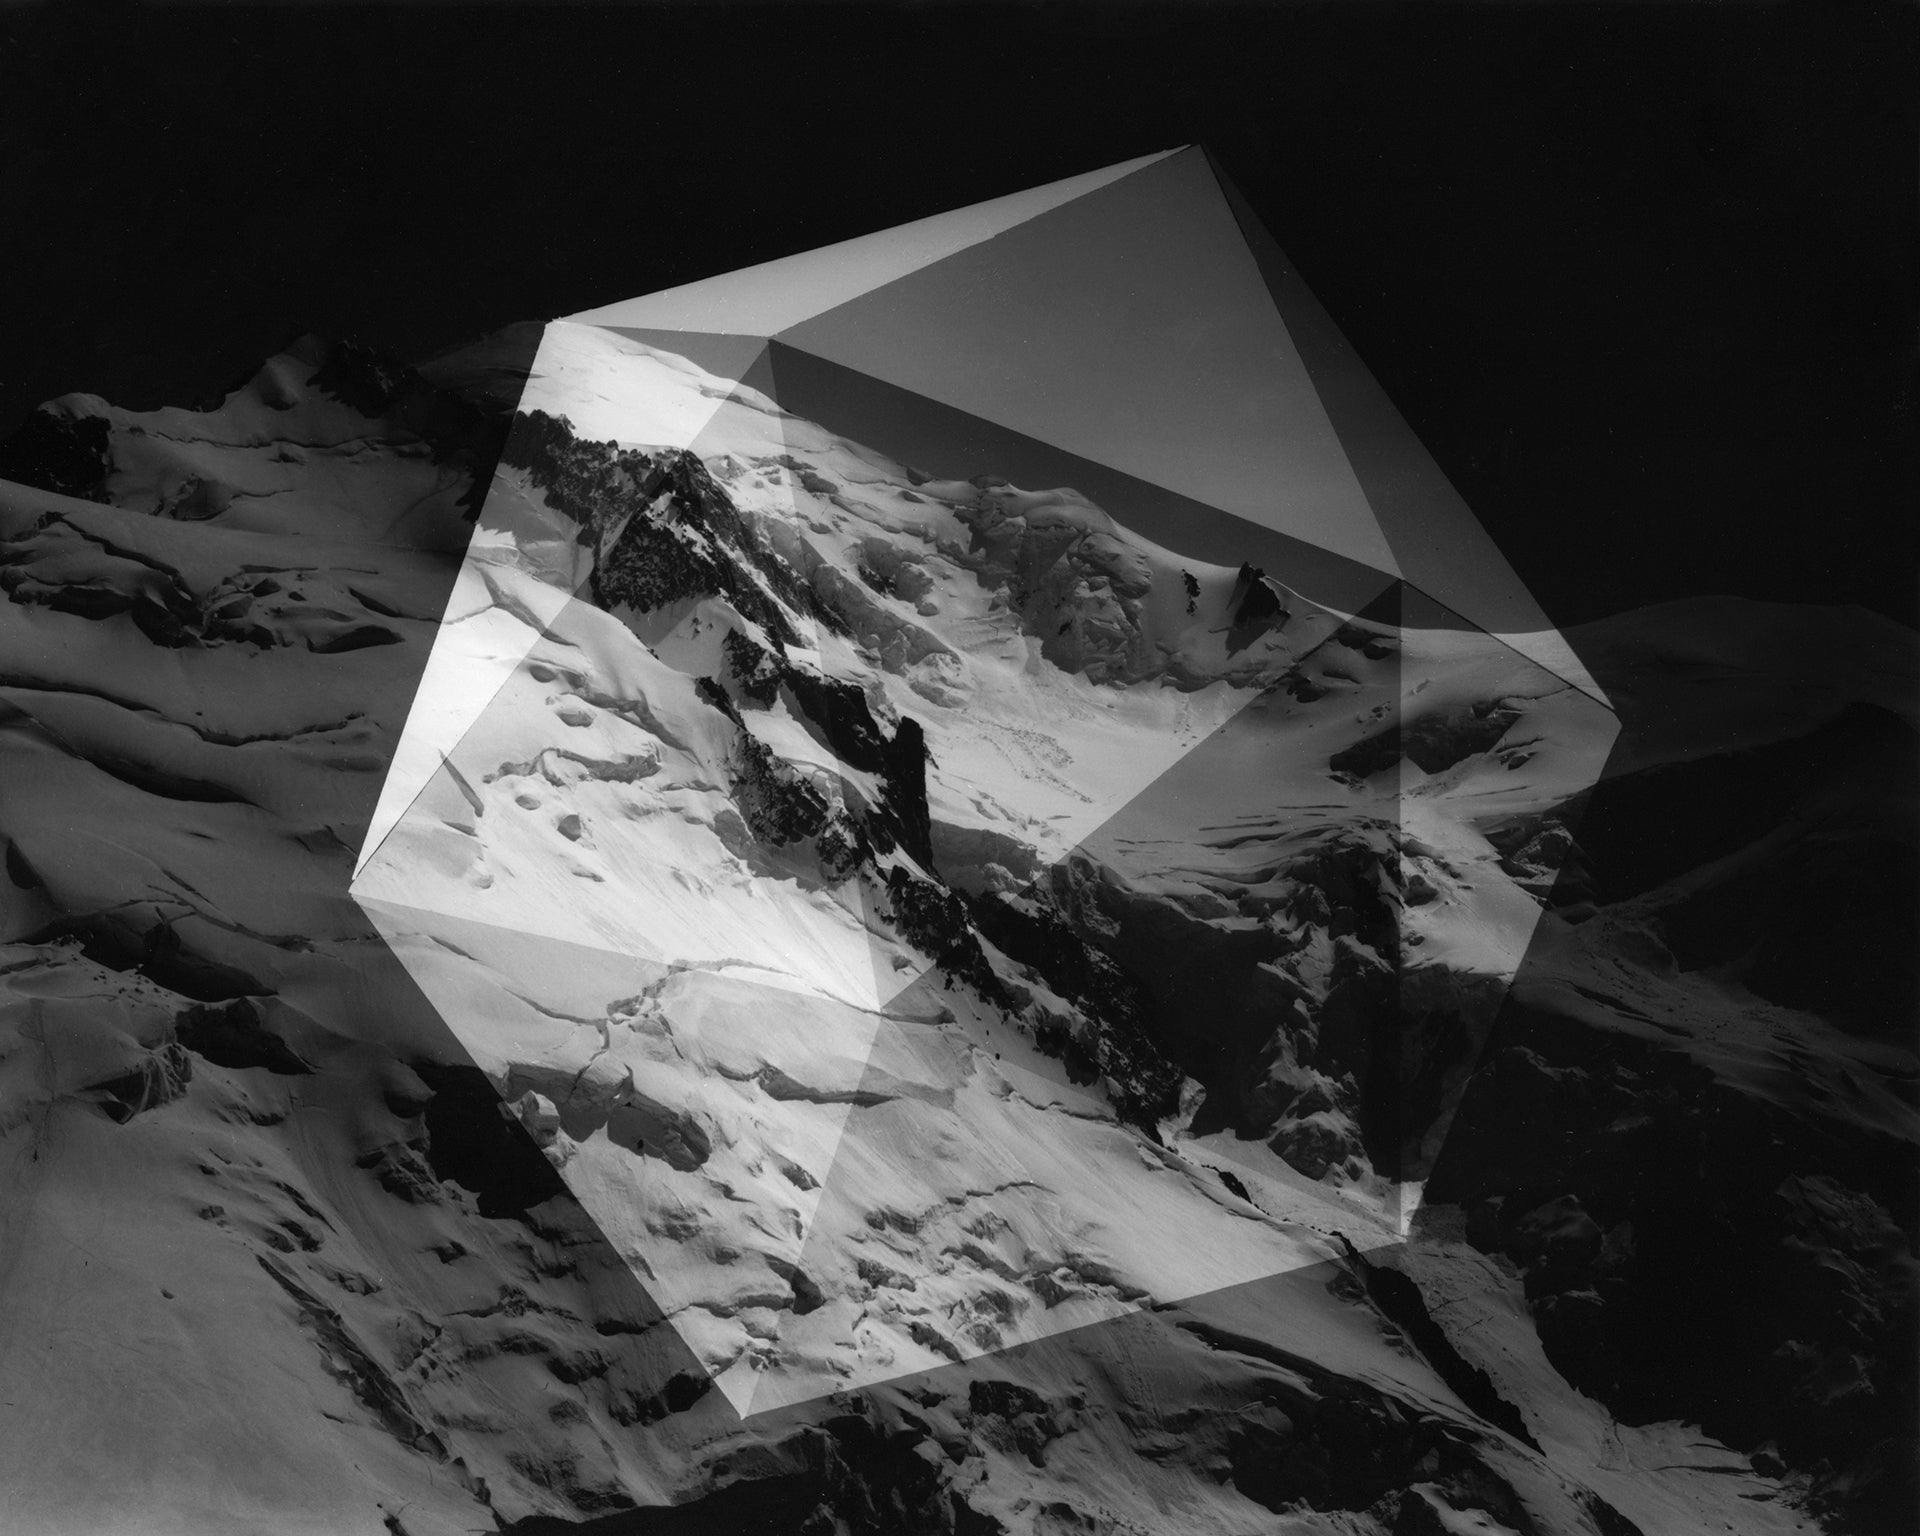 Photography by Millee Tibbs titled "Icosahedron / Mont Blanc: Crampon Boule".